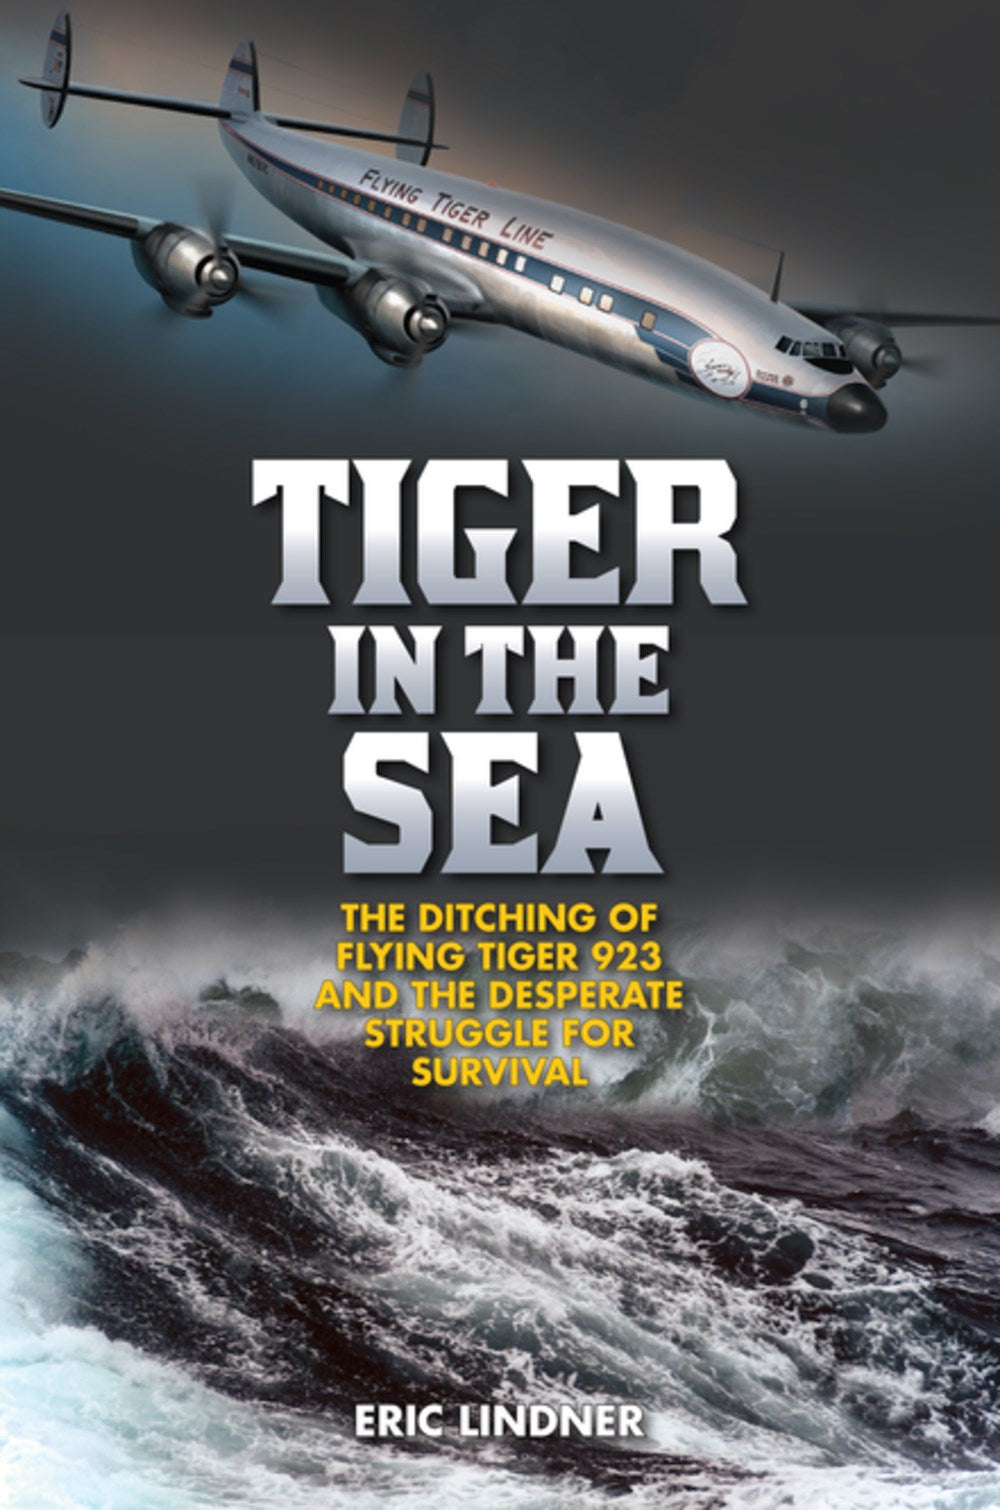 Tiger in the Sea: The Ditching of Flying Tiger 923 and the Desperate Struggle for Survival